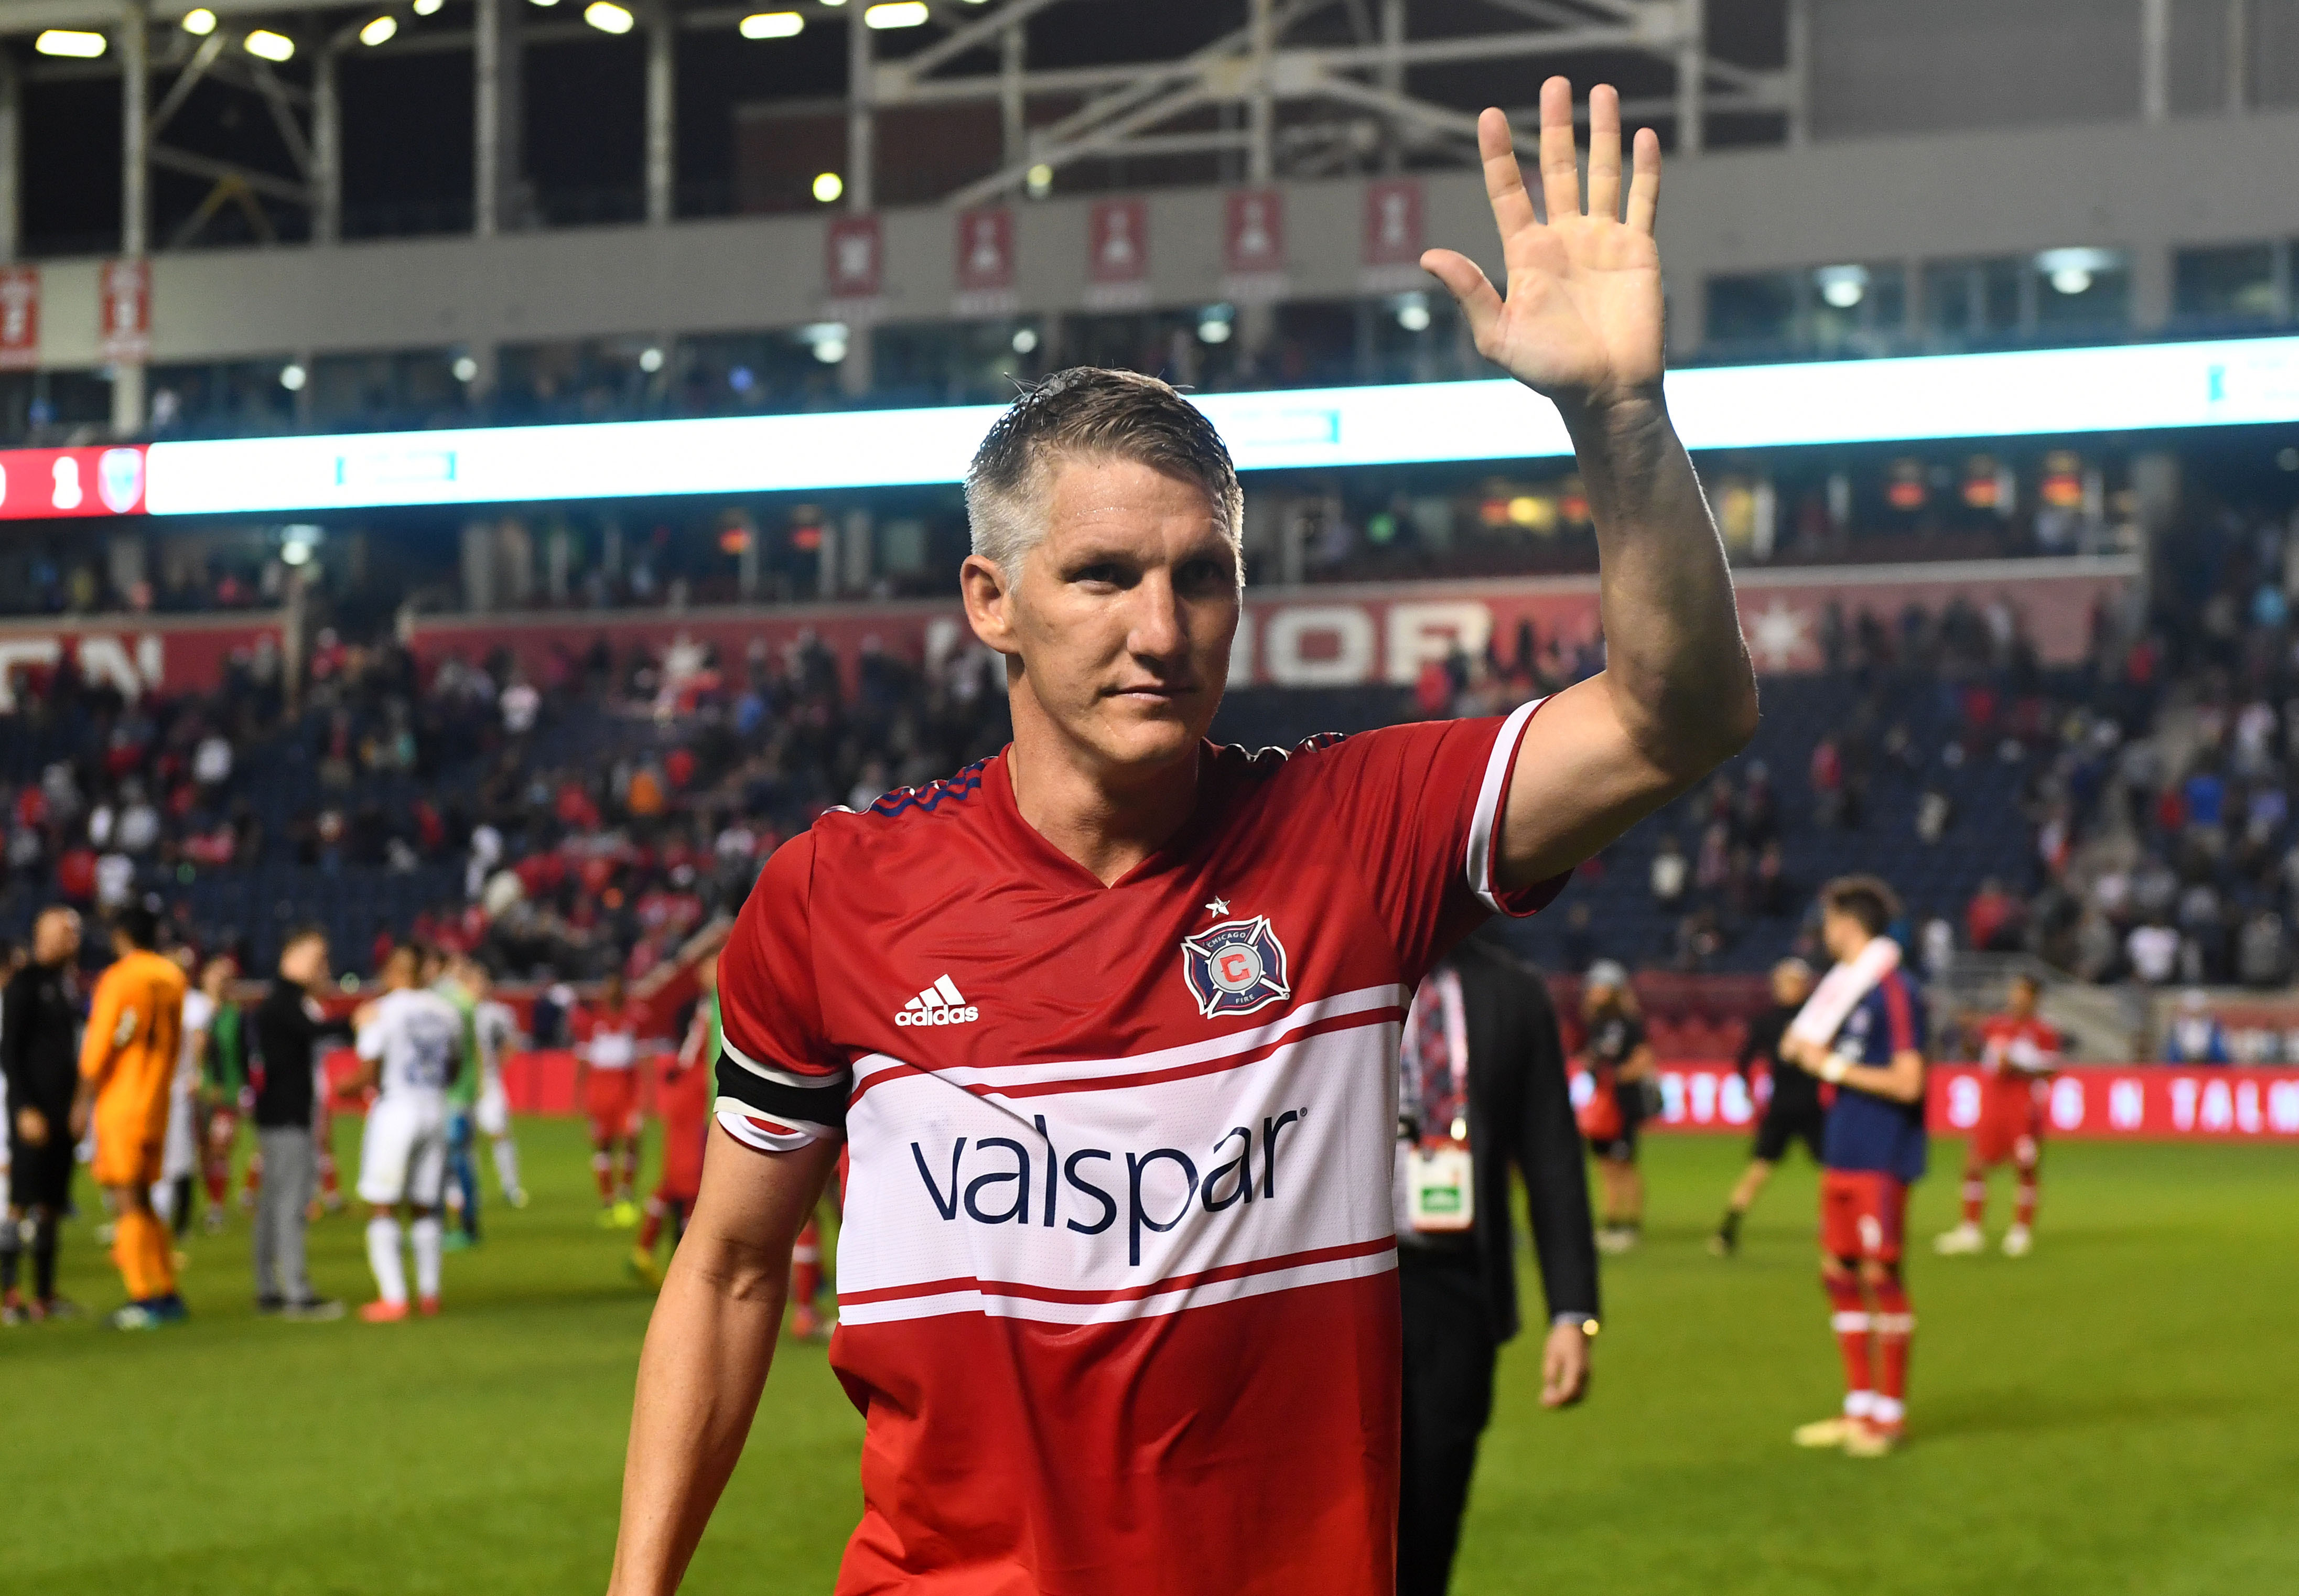 MLS: San Jose Earthquakes at Chicago Fire